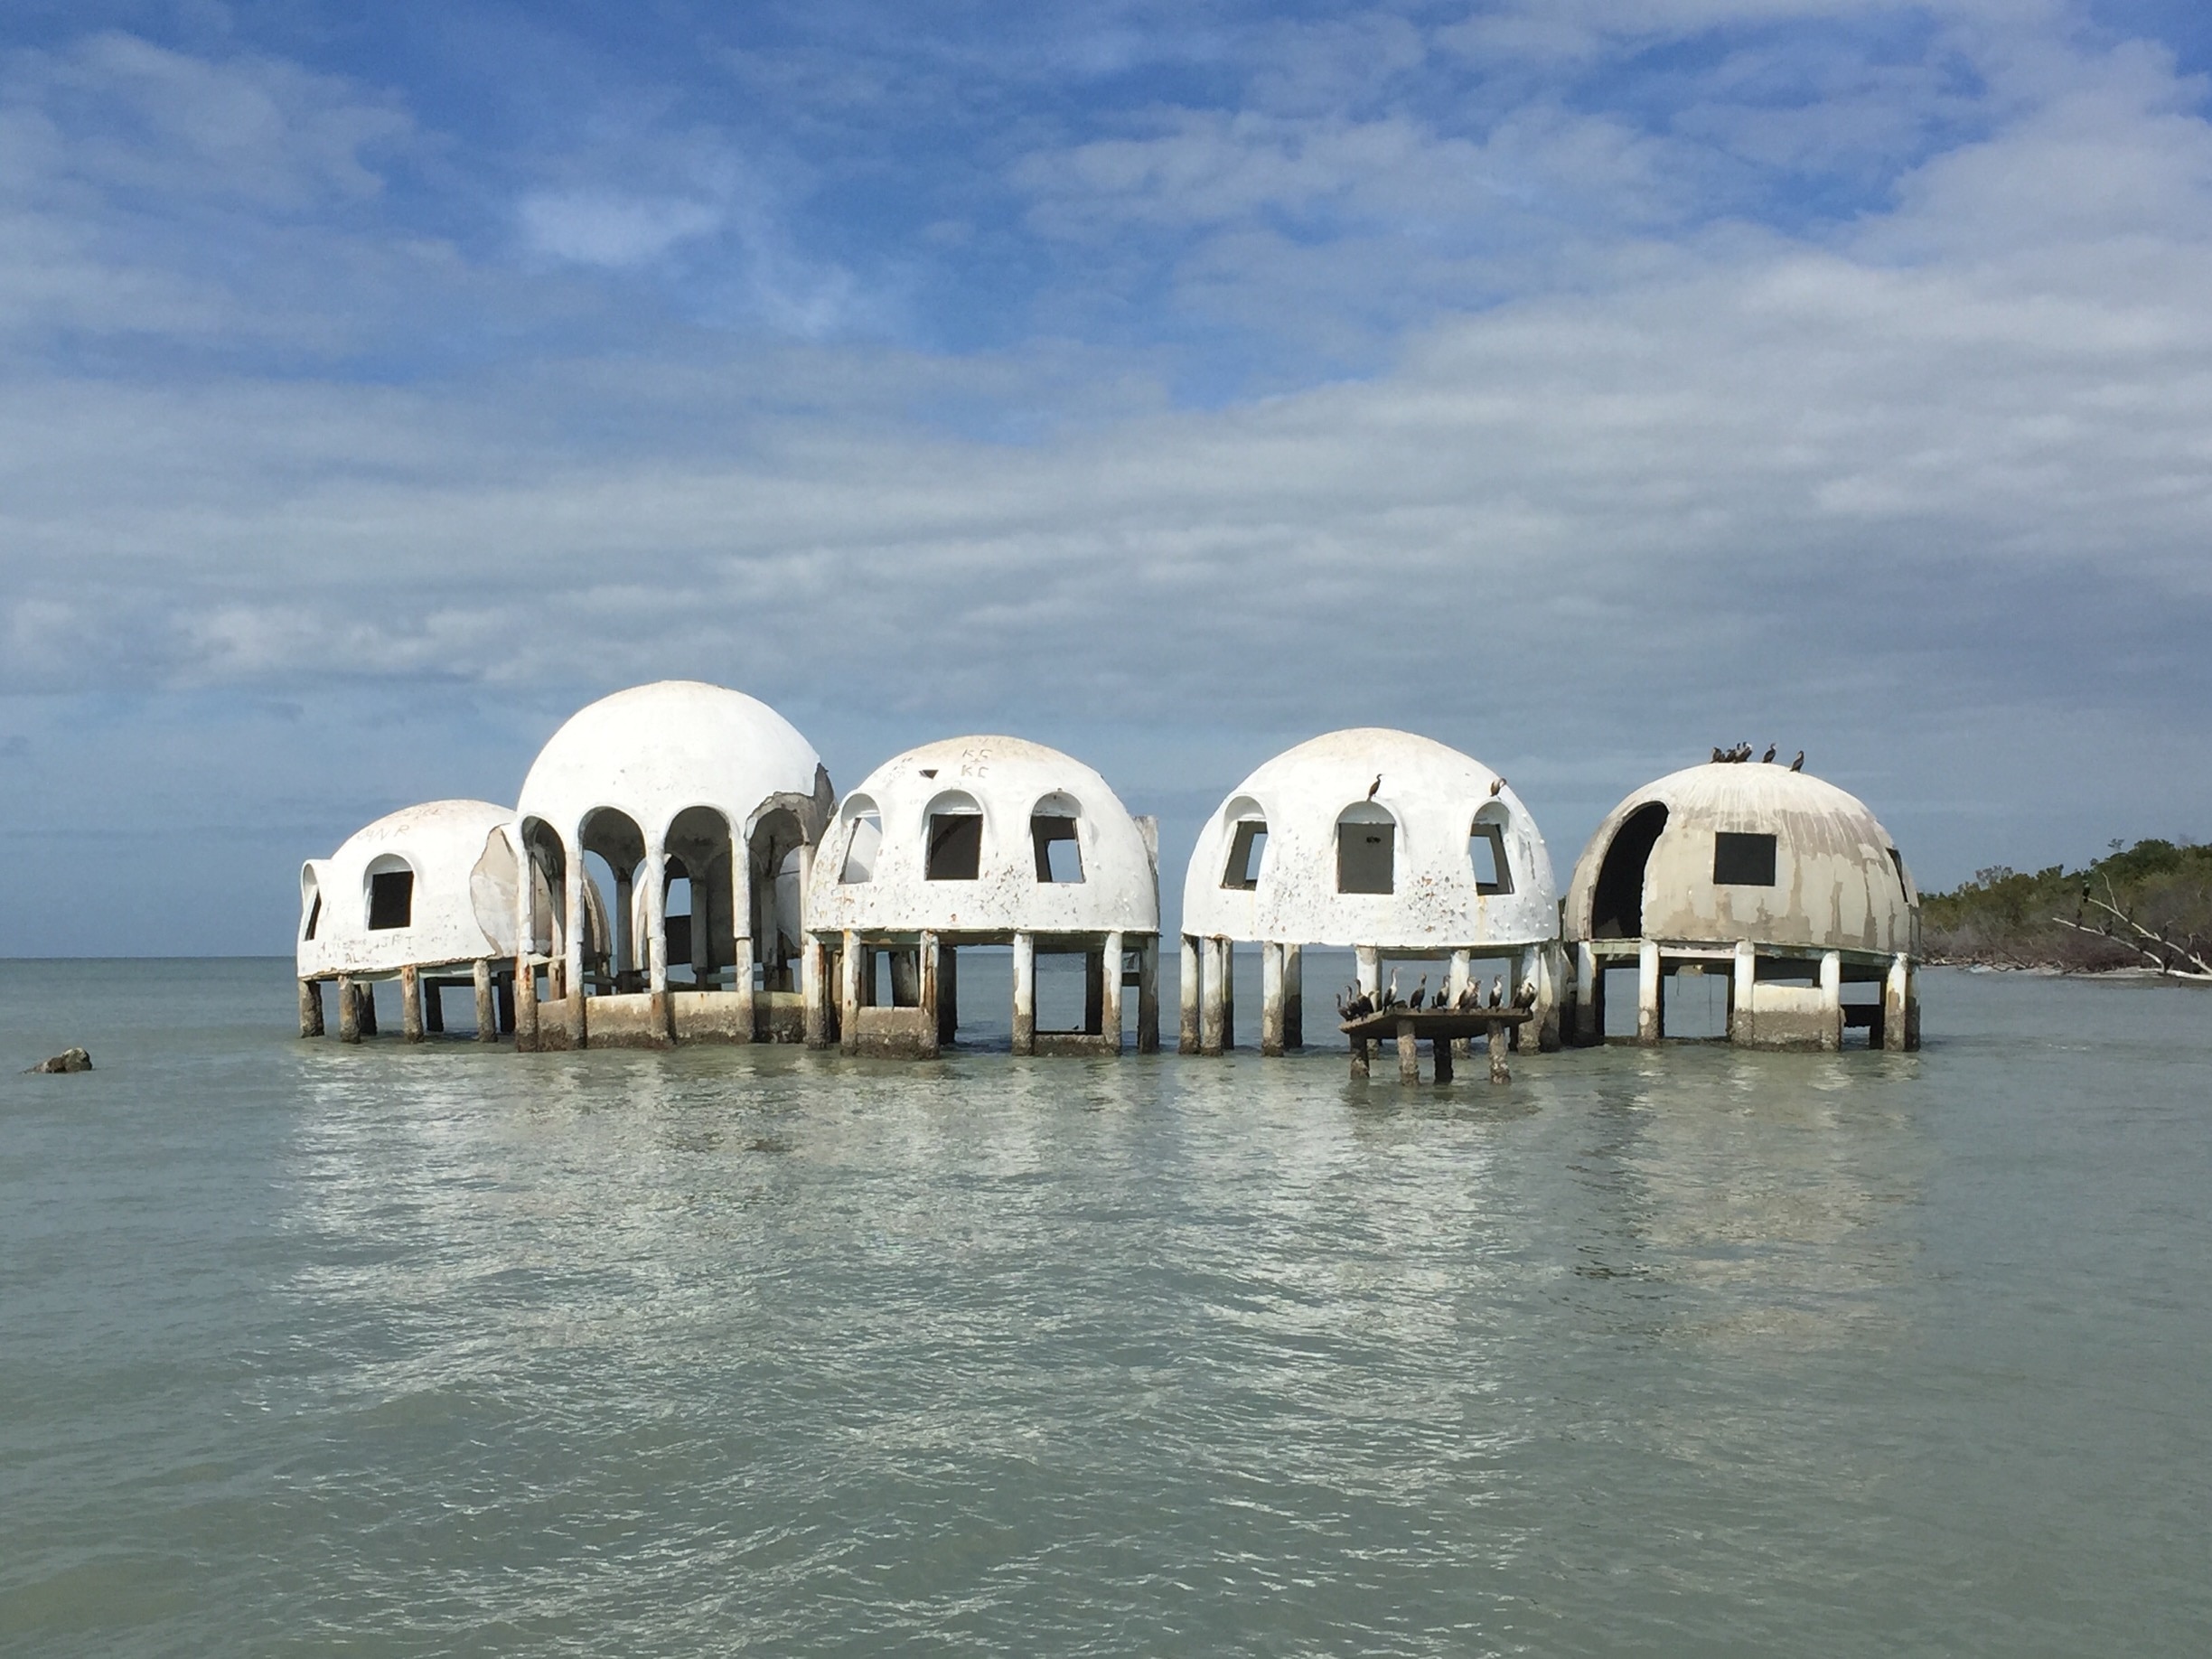 Cape Romano Dome Homes
#waterlust
#stunningstructures